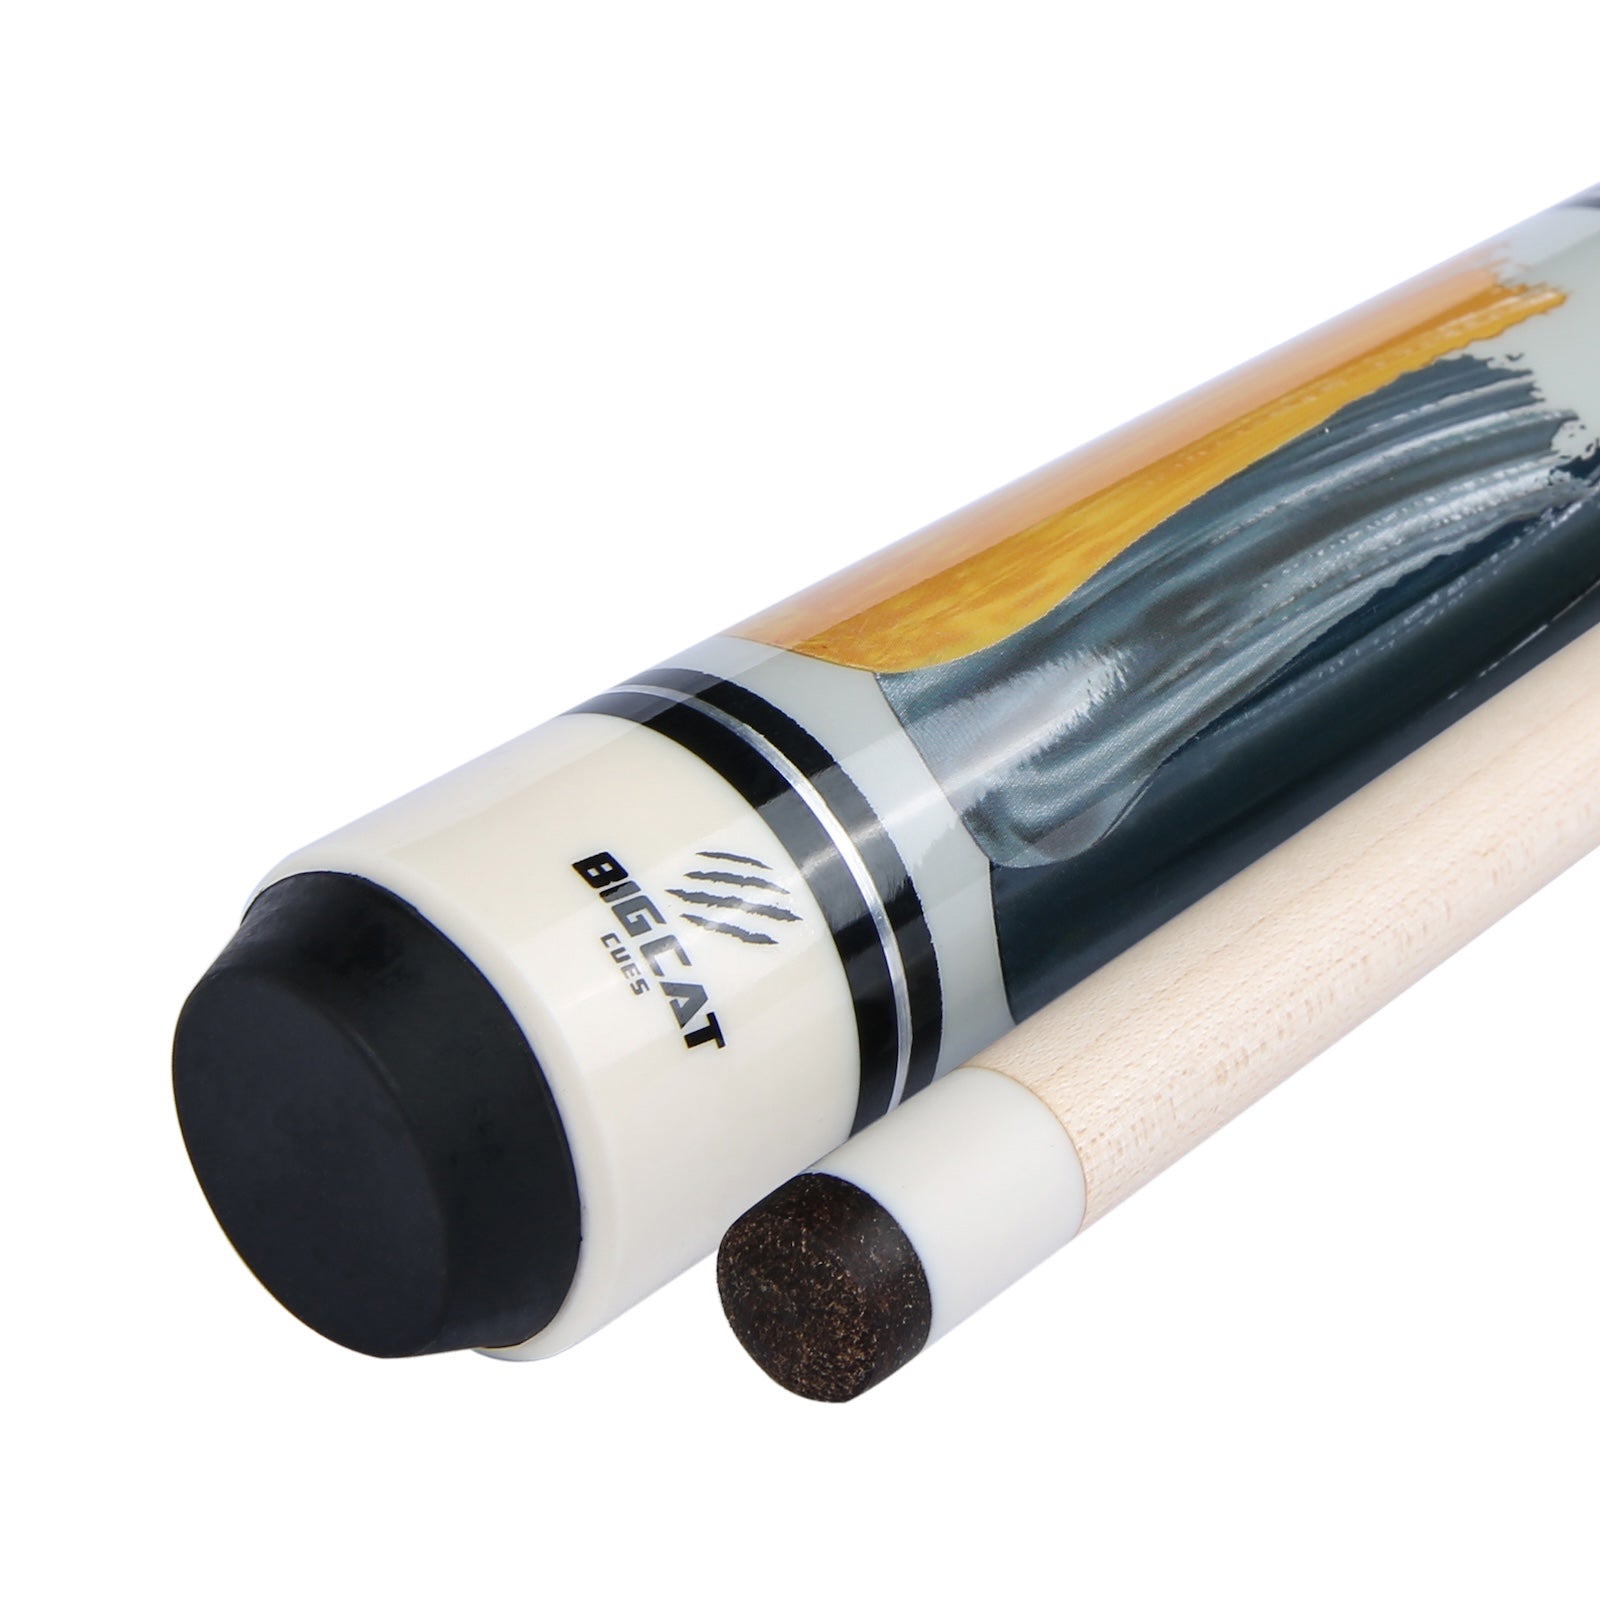 Big Cat Paint VI Electric Ocean Pool Cue Stick - 18/19/20/21 oz, Big Cat Professional Leather tip, 12.5mm, 58" Length, Billiard Pool Cue Sticks for Men, Ideal for Home or Commercial/Bar Settings, Premium Quality Grade A Canadian Maple